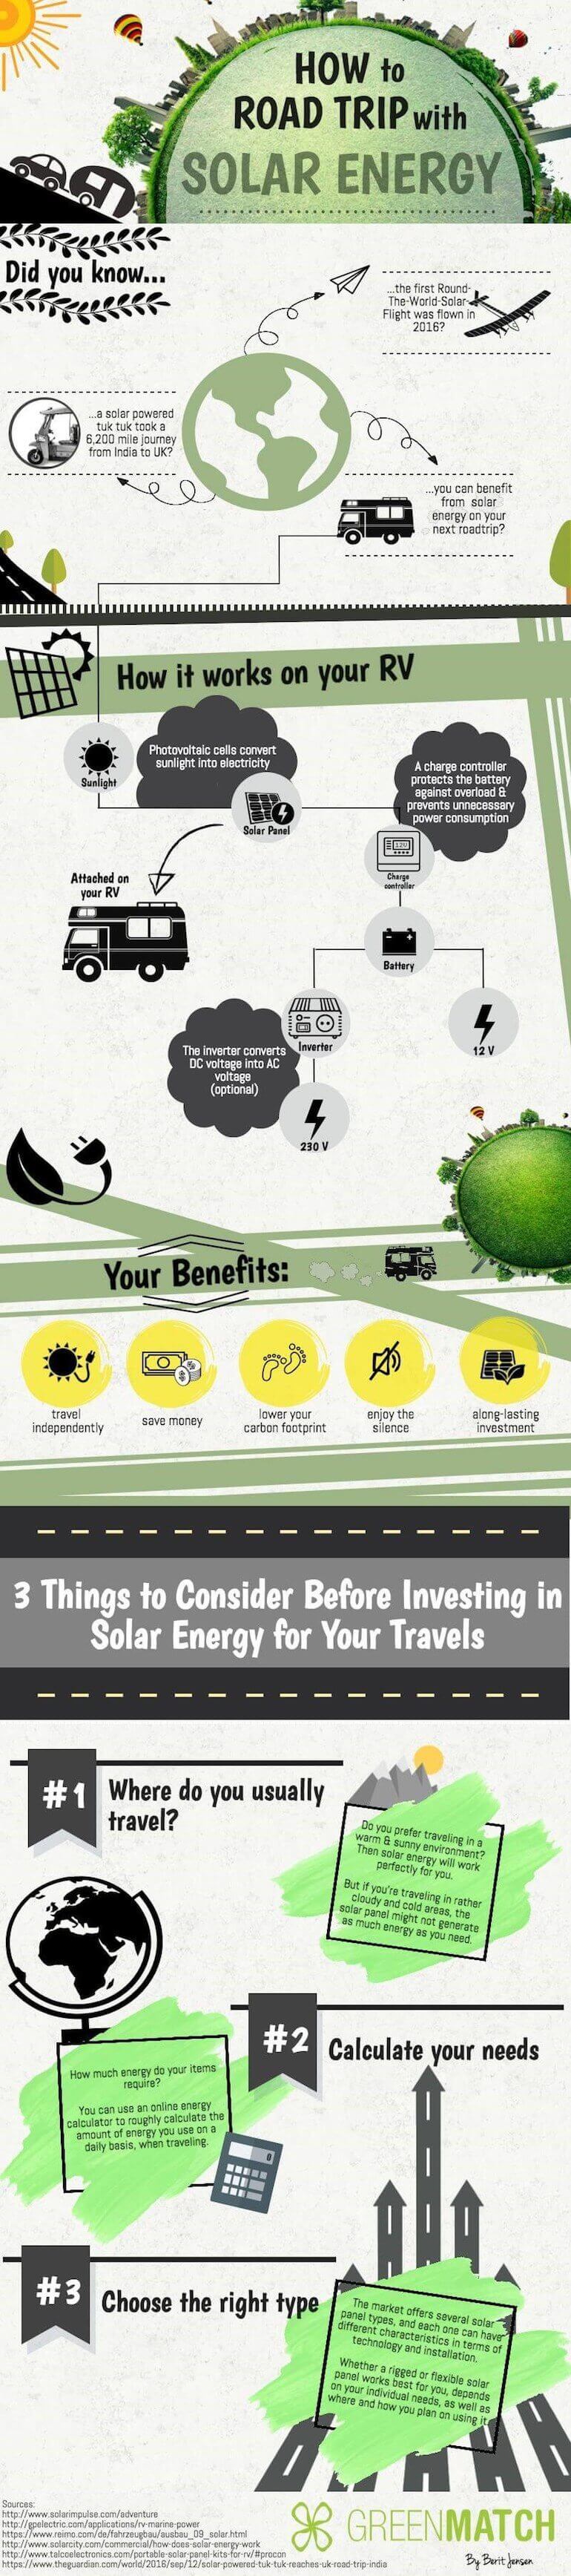 Infographic about how to roadtrip with solar energy